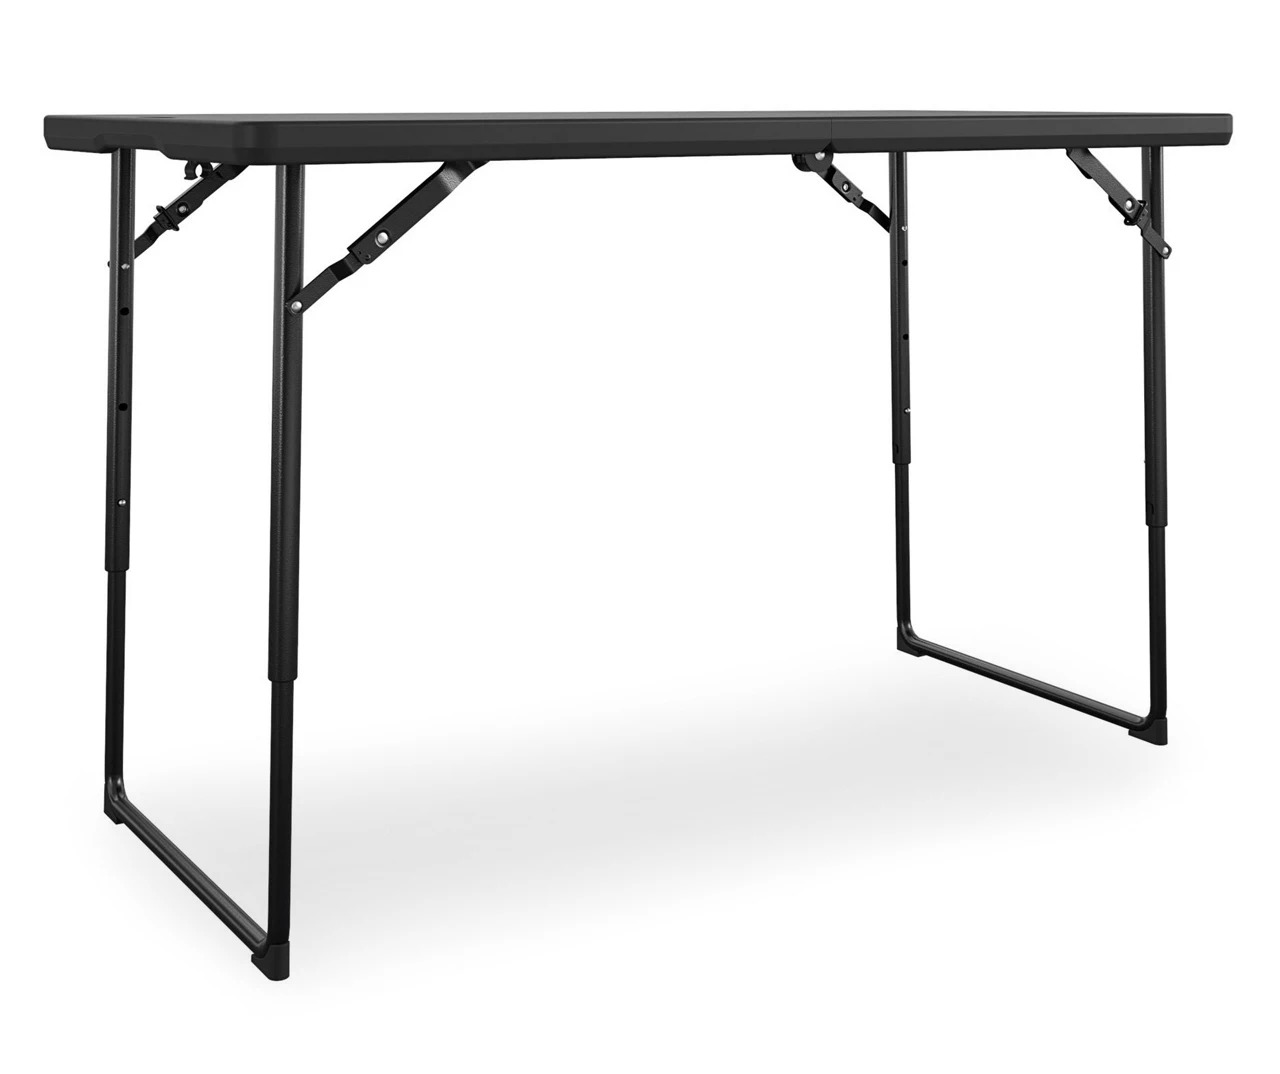 $29.99 for Cosco 4' Black Folding Blow Mold Table at BIG LOTS!